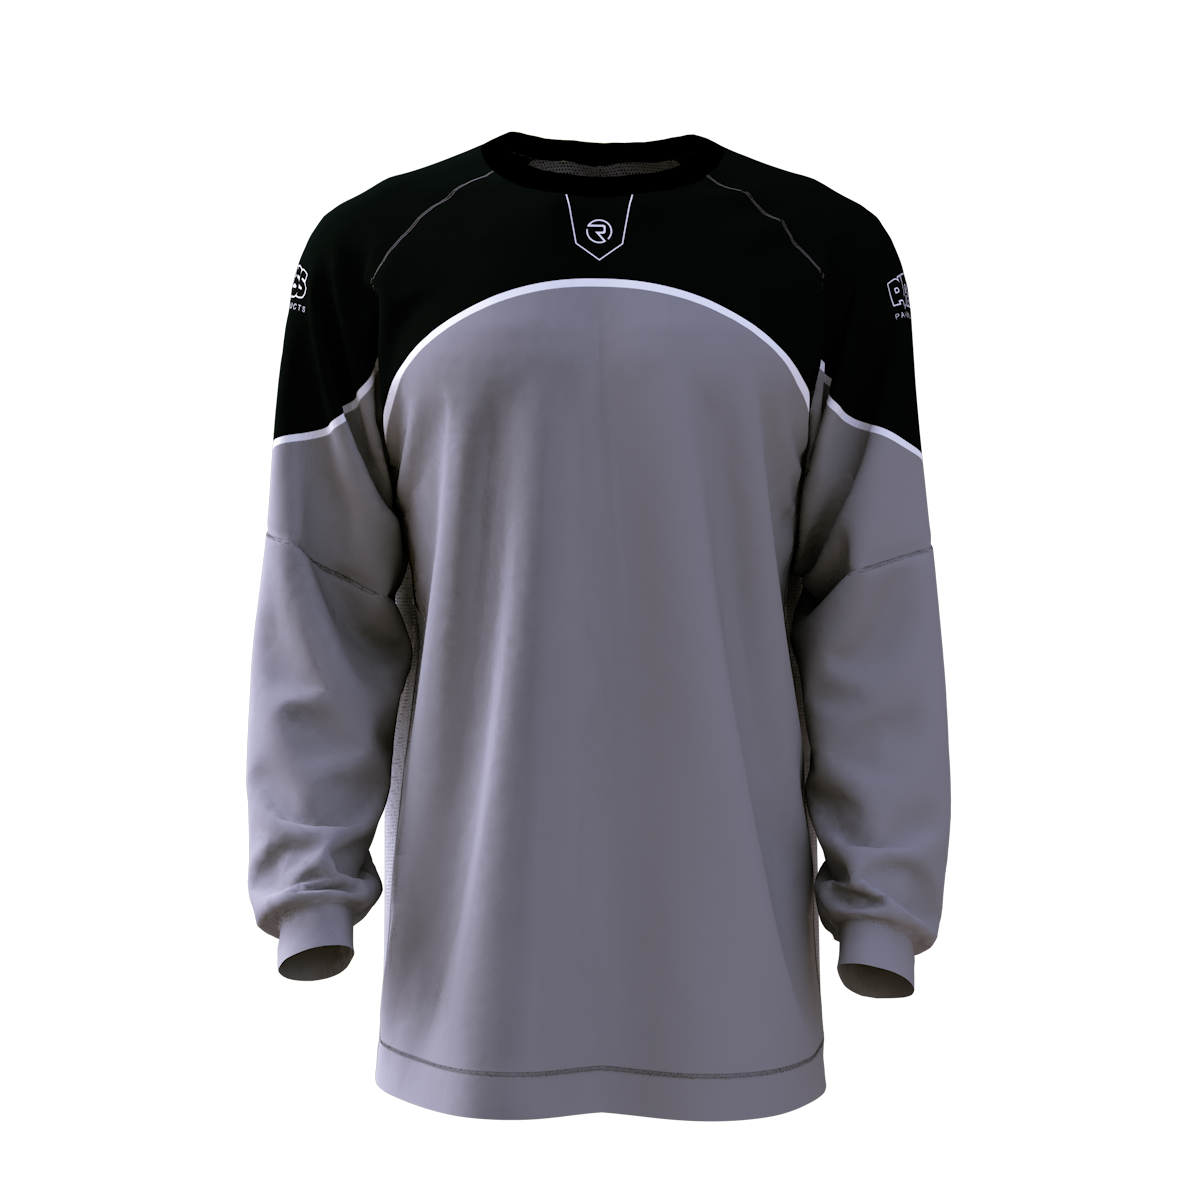 Full Chest Breeze Jersey - Ruthless Paintball Products